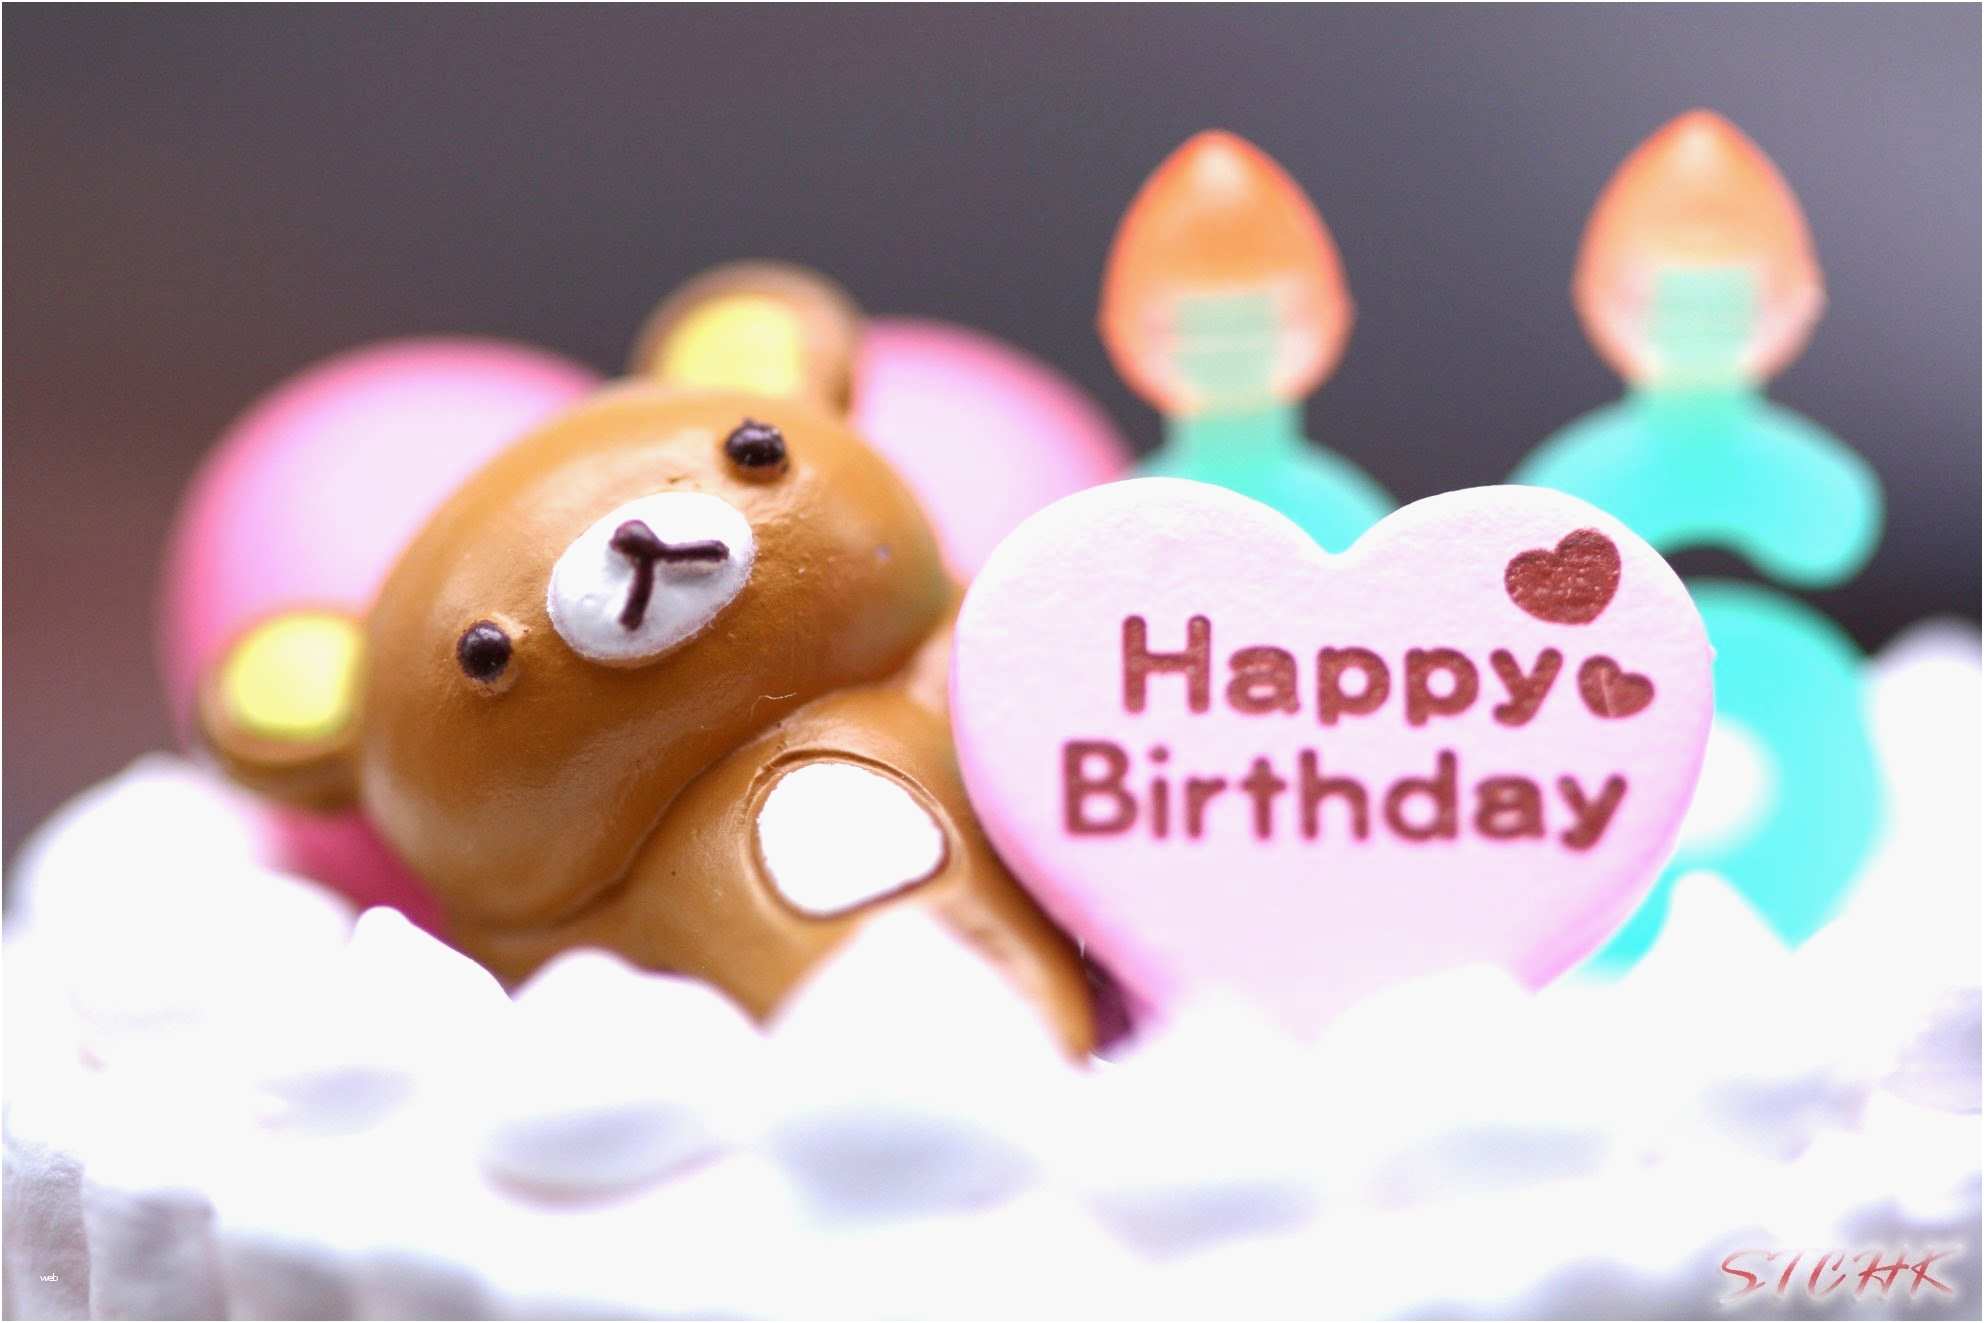 Happy Birthday Song Background Music Free Download - Cute Happy Birthday Cake , HD Wallpaper & Backgrounds